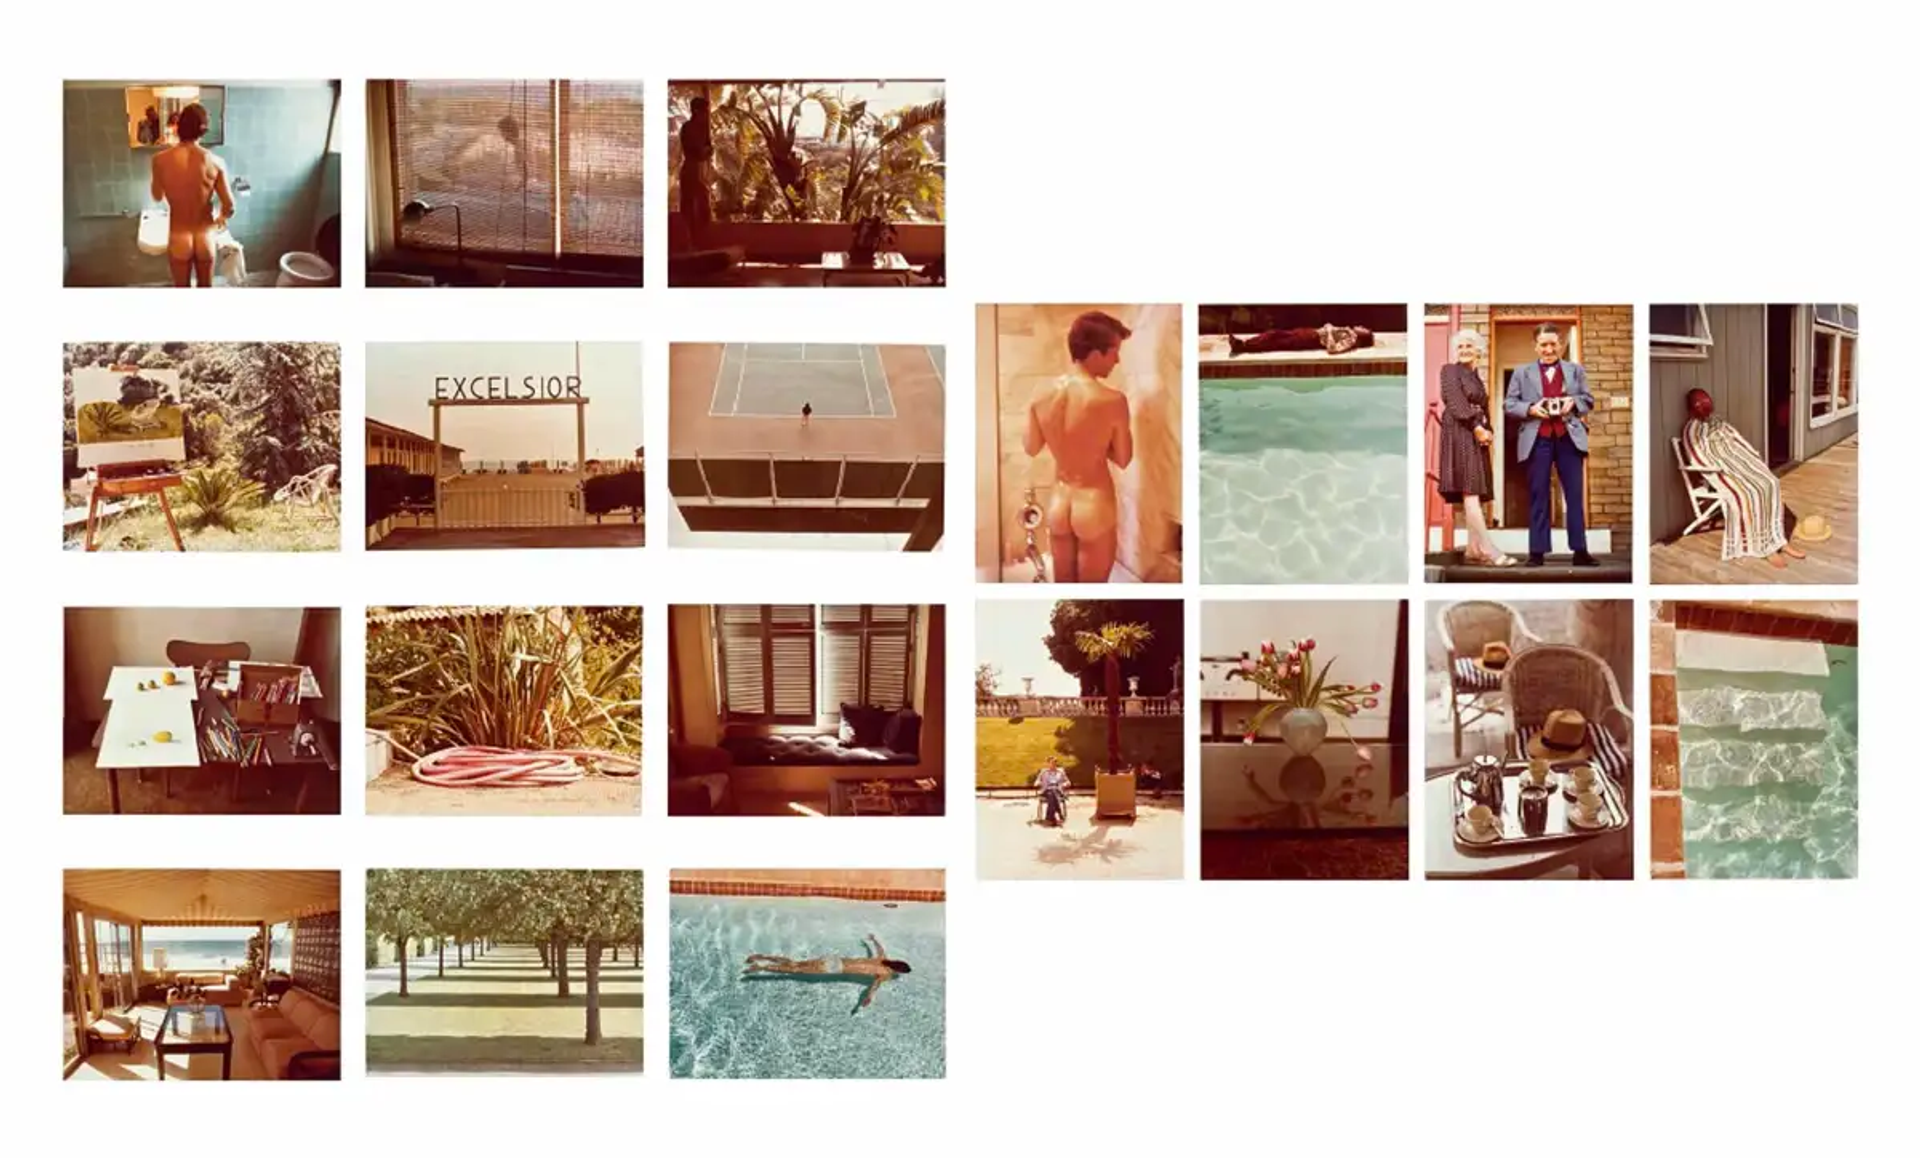 A complete set of David Hockney's photographs, which shows a variety of pool swims, nude men, and California landscapes.